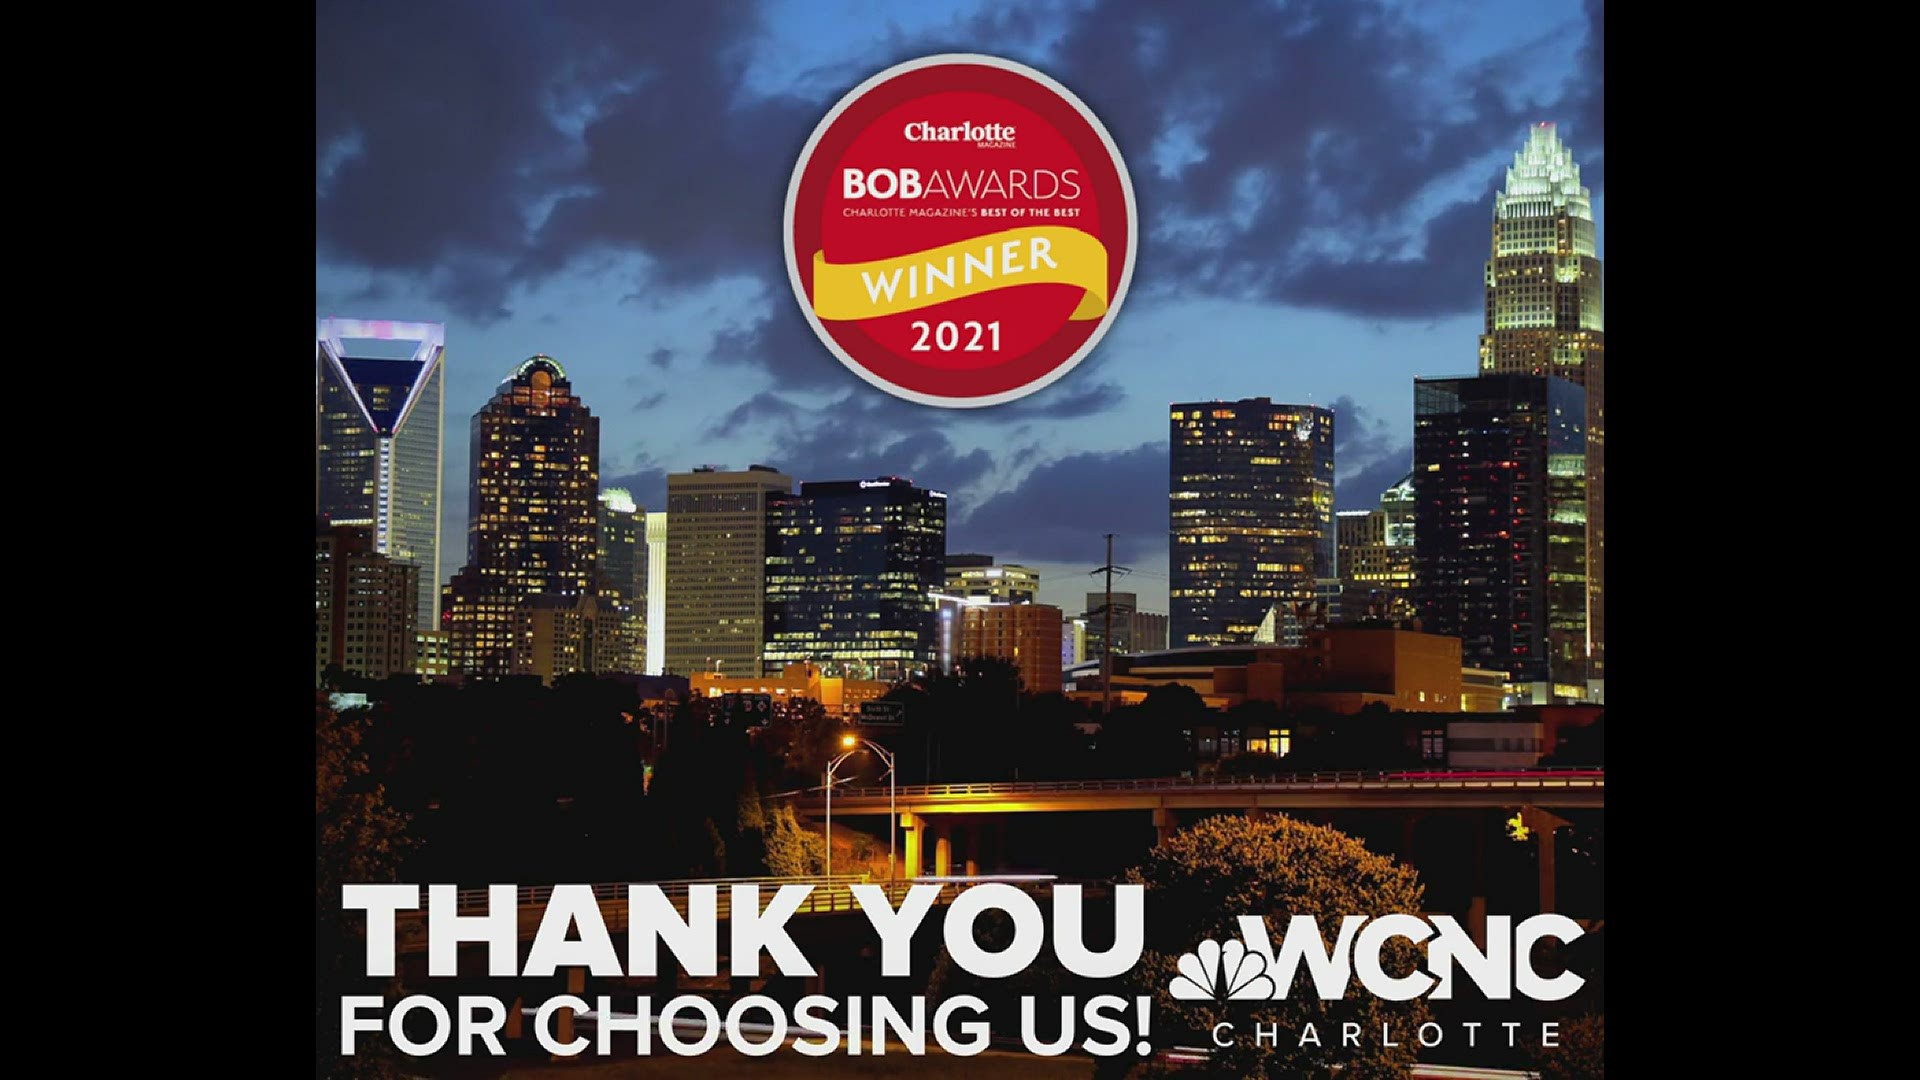 WCNC Charlotte honored with some top industry awards voted on by the community.